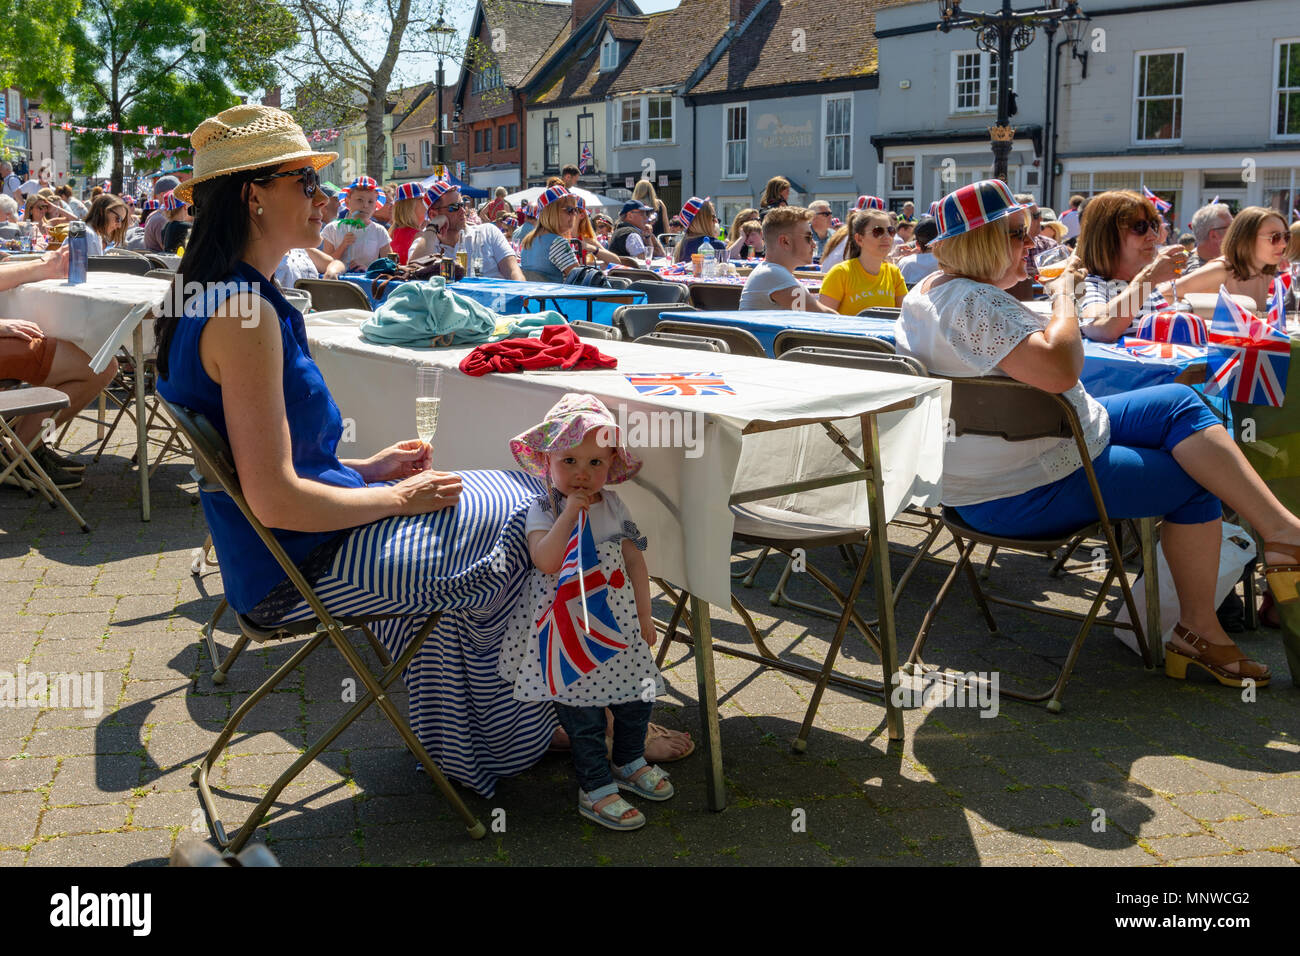 People watching the royal wedding of Prince Harry and Meghan Markle on a public outdoor screen in Ringwood, New Forest, Hampshire, England, UK, 19th May 2018. Young girl chewing on a Union Jack flag. Stock Photo